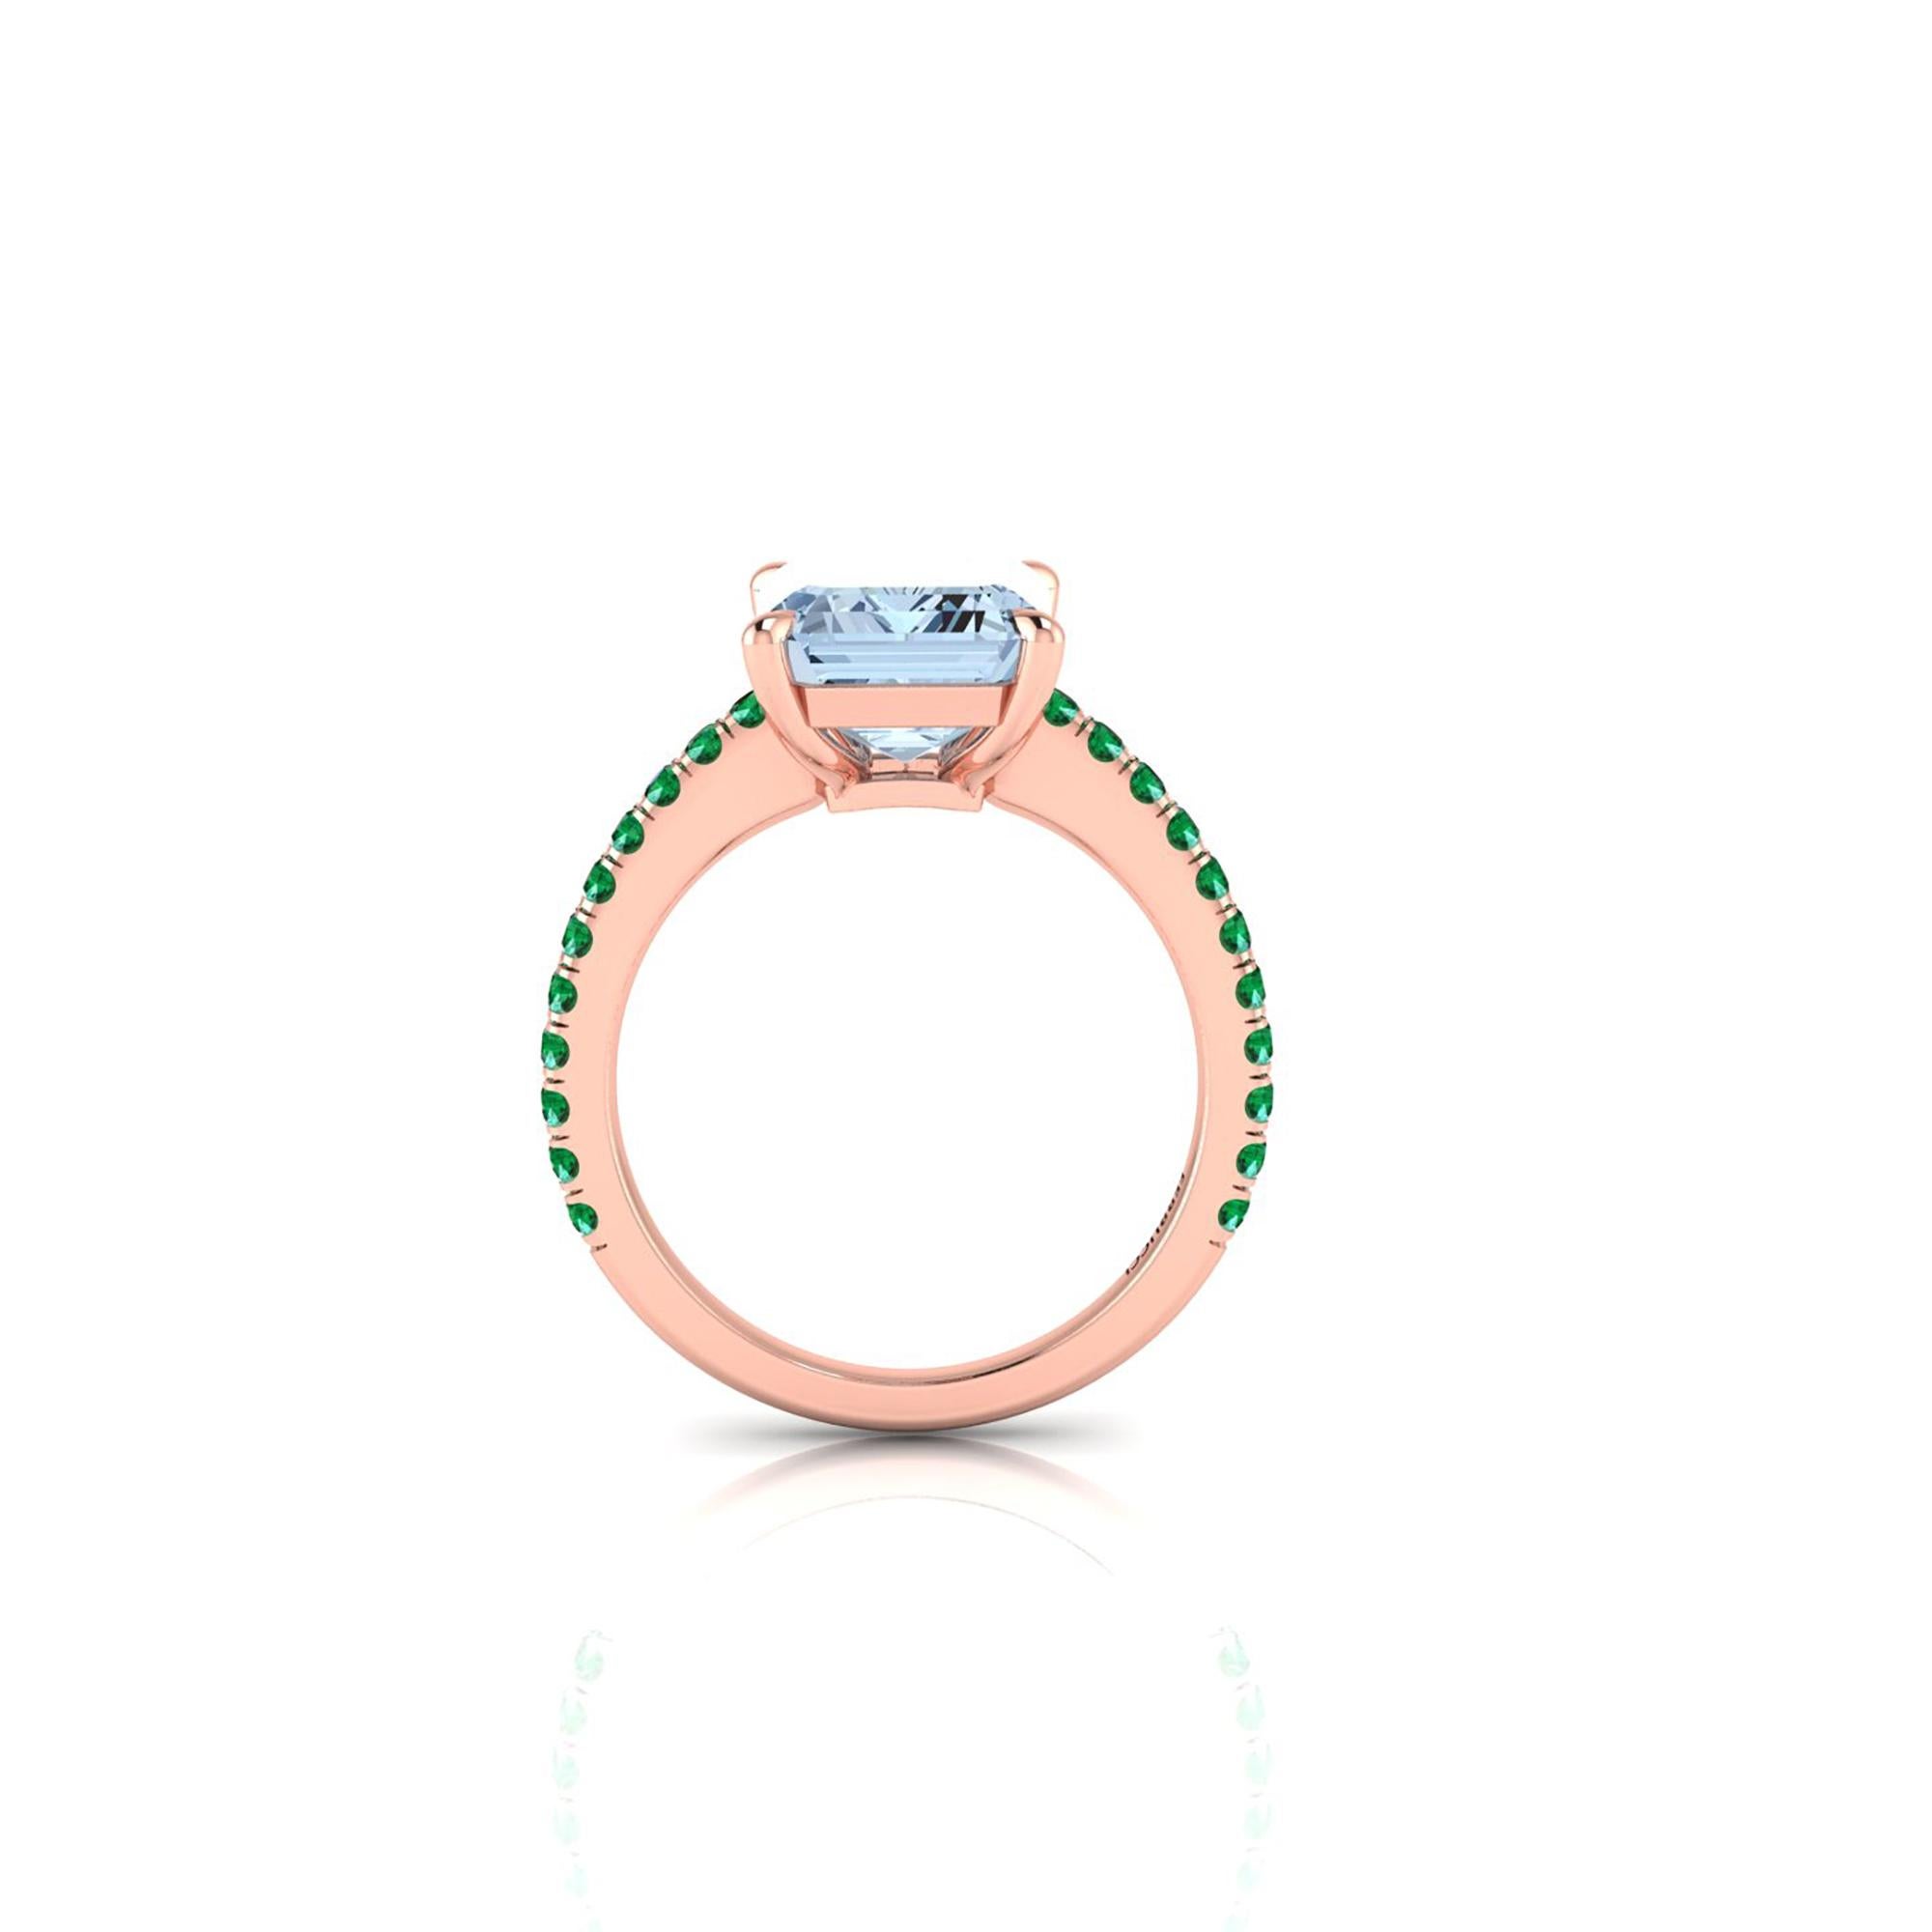 An exquisite 4.54 carat Aquamarine, emerald cut, very high quality color, eye clean gem, accompanied a pave' of bright green Emeralds of approximately  total carat weight of 0.35 carat, set in an hand crafted, delicate and sophisticated looking 18k